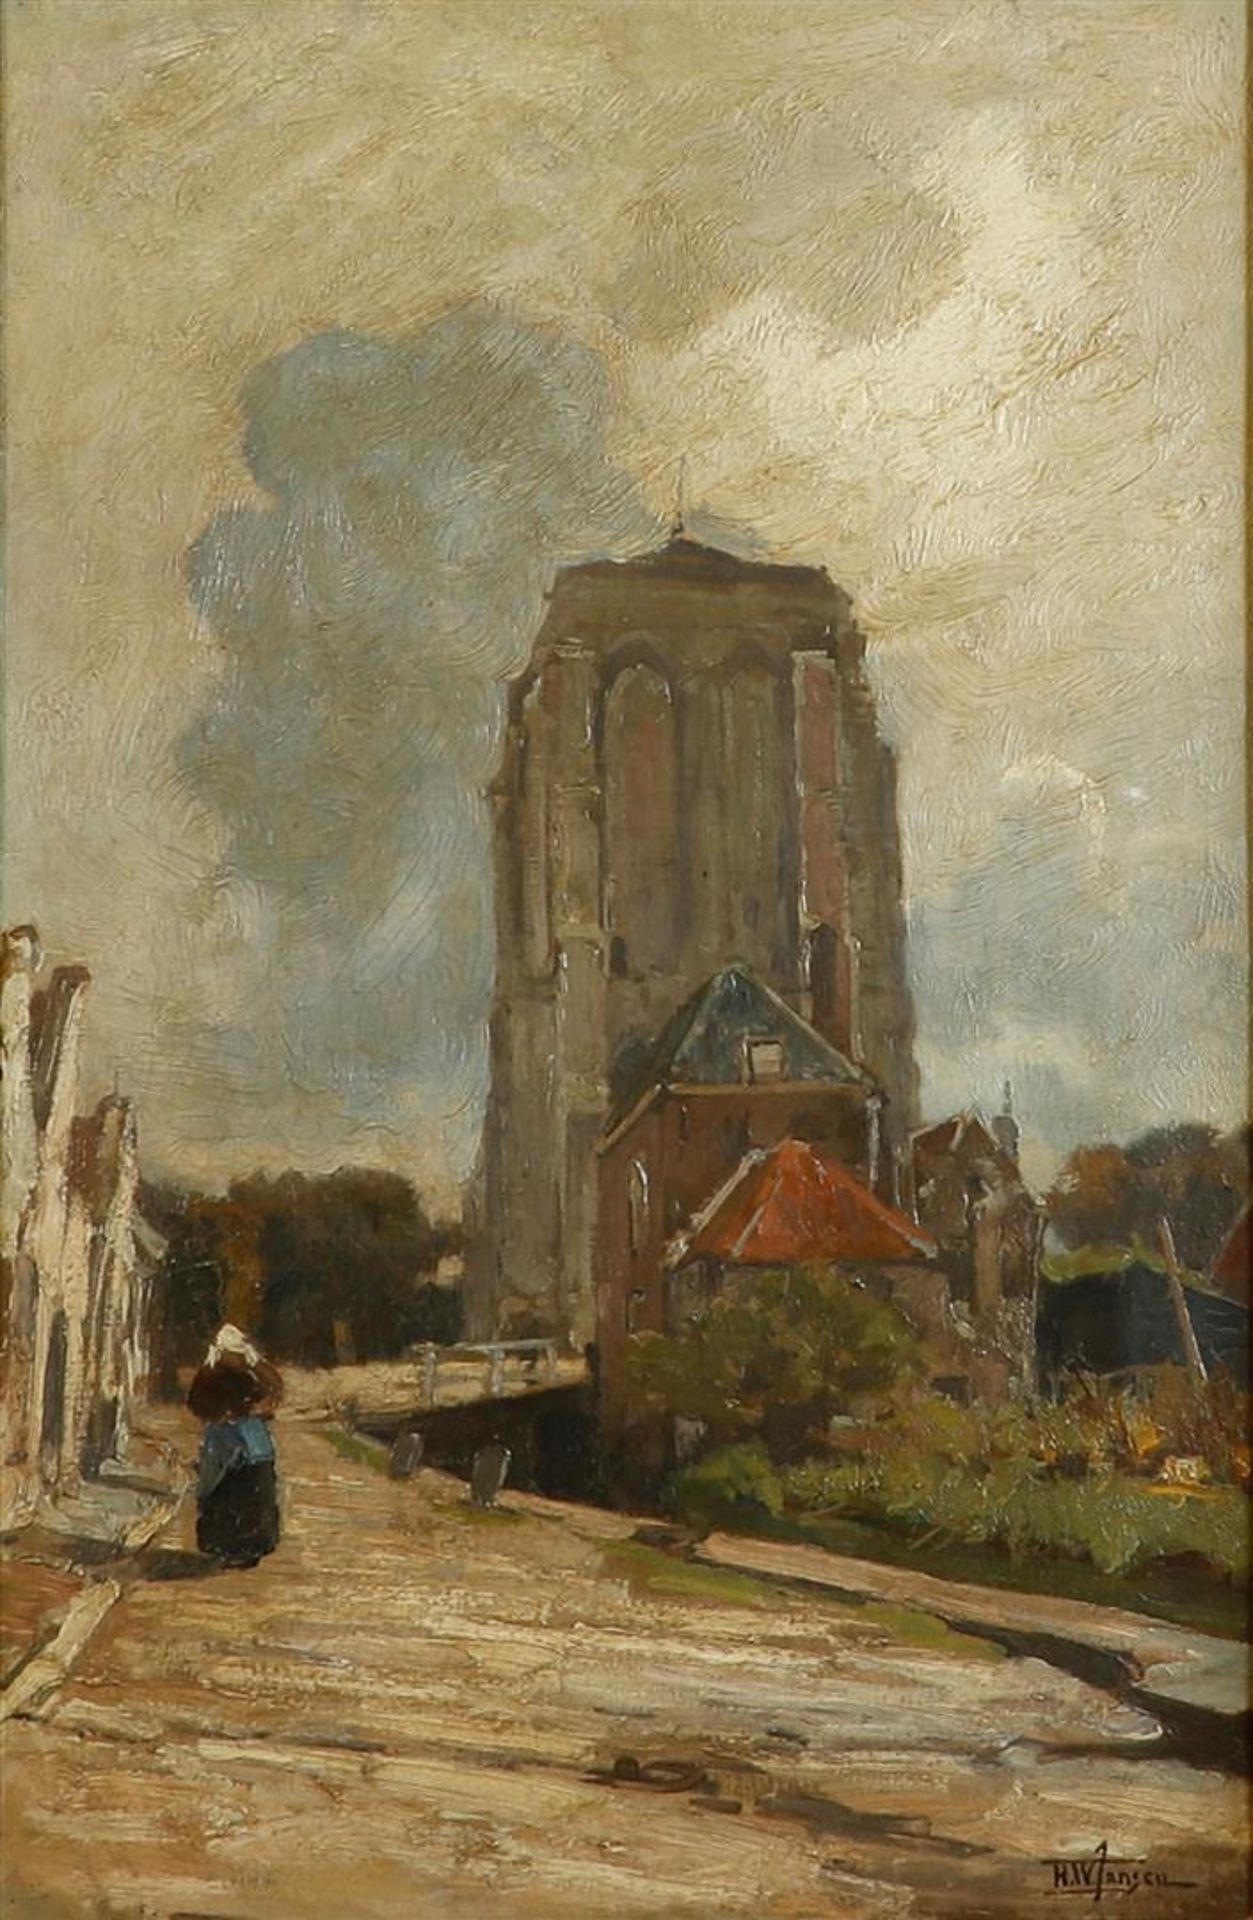 Hendrik Willebrord Jansen (Zeist 1855 - 1911), Cityscape in Holland with a stubby tower. Signed (low